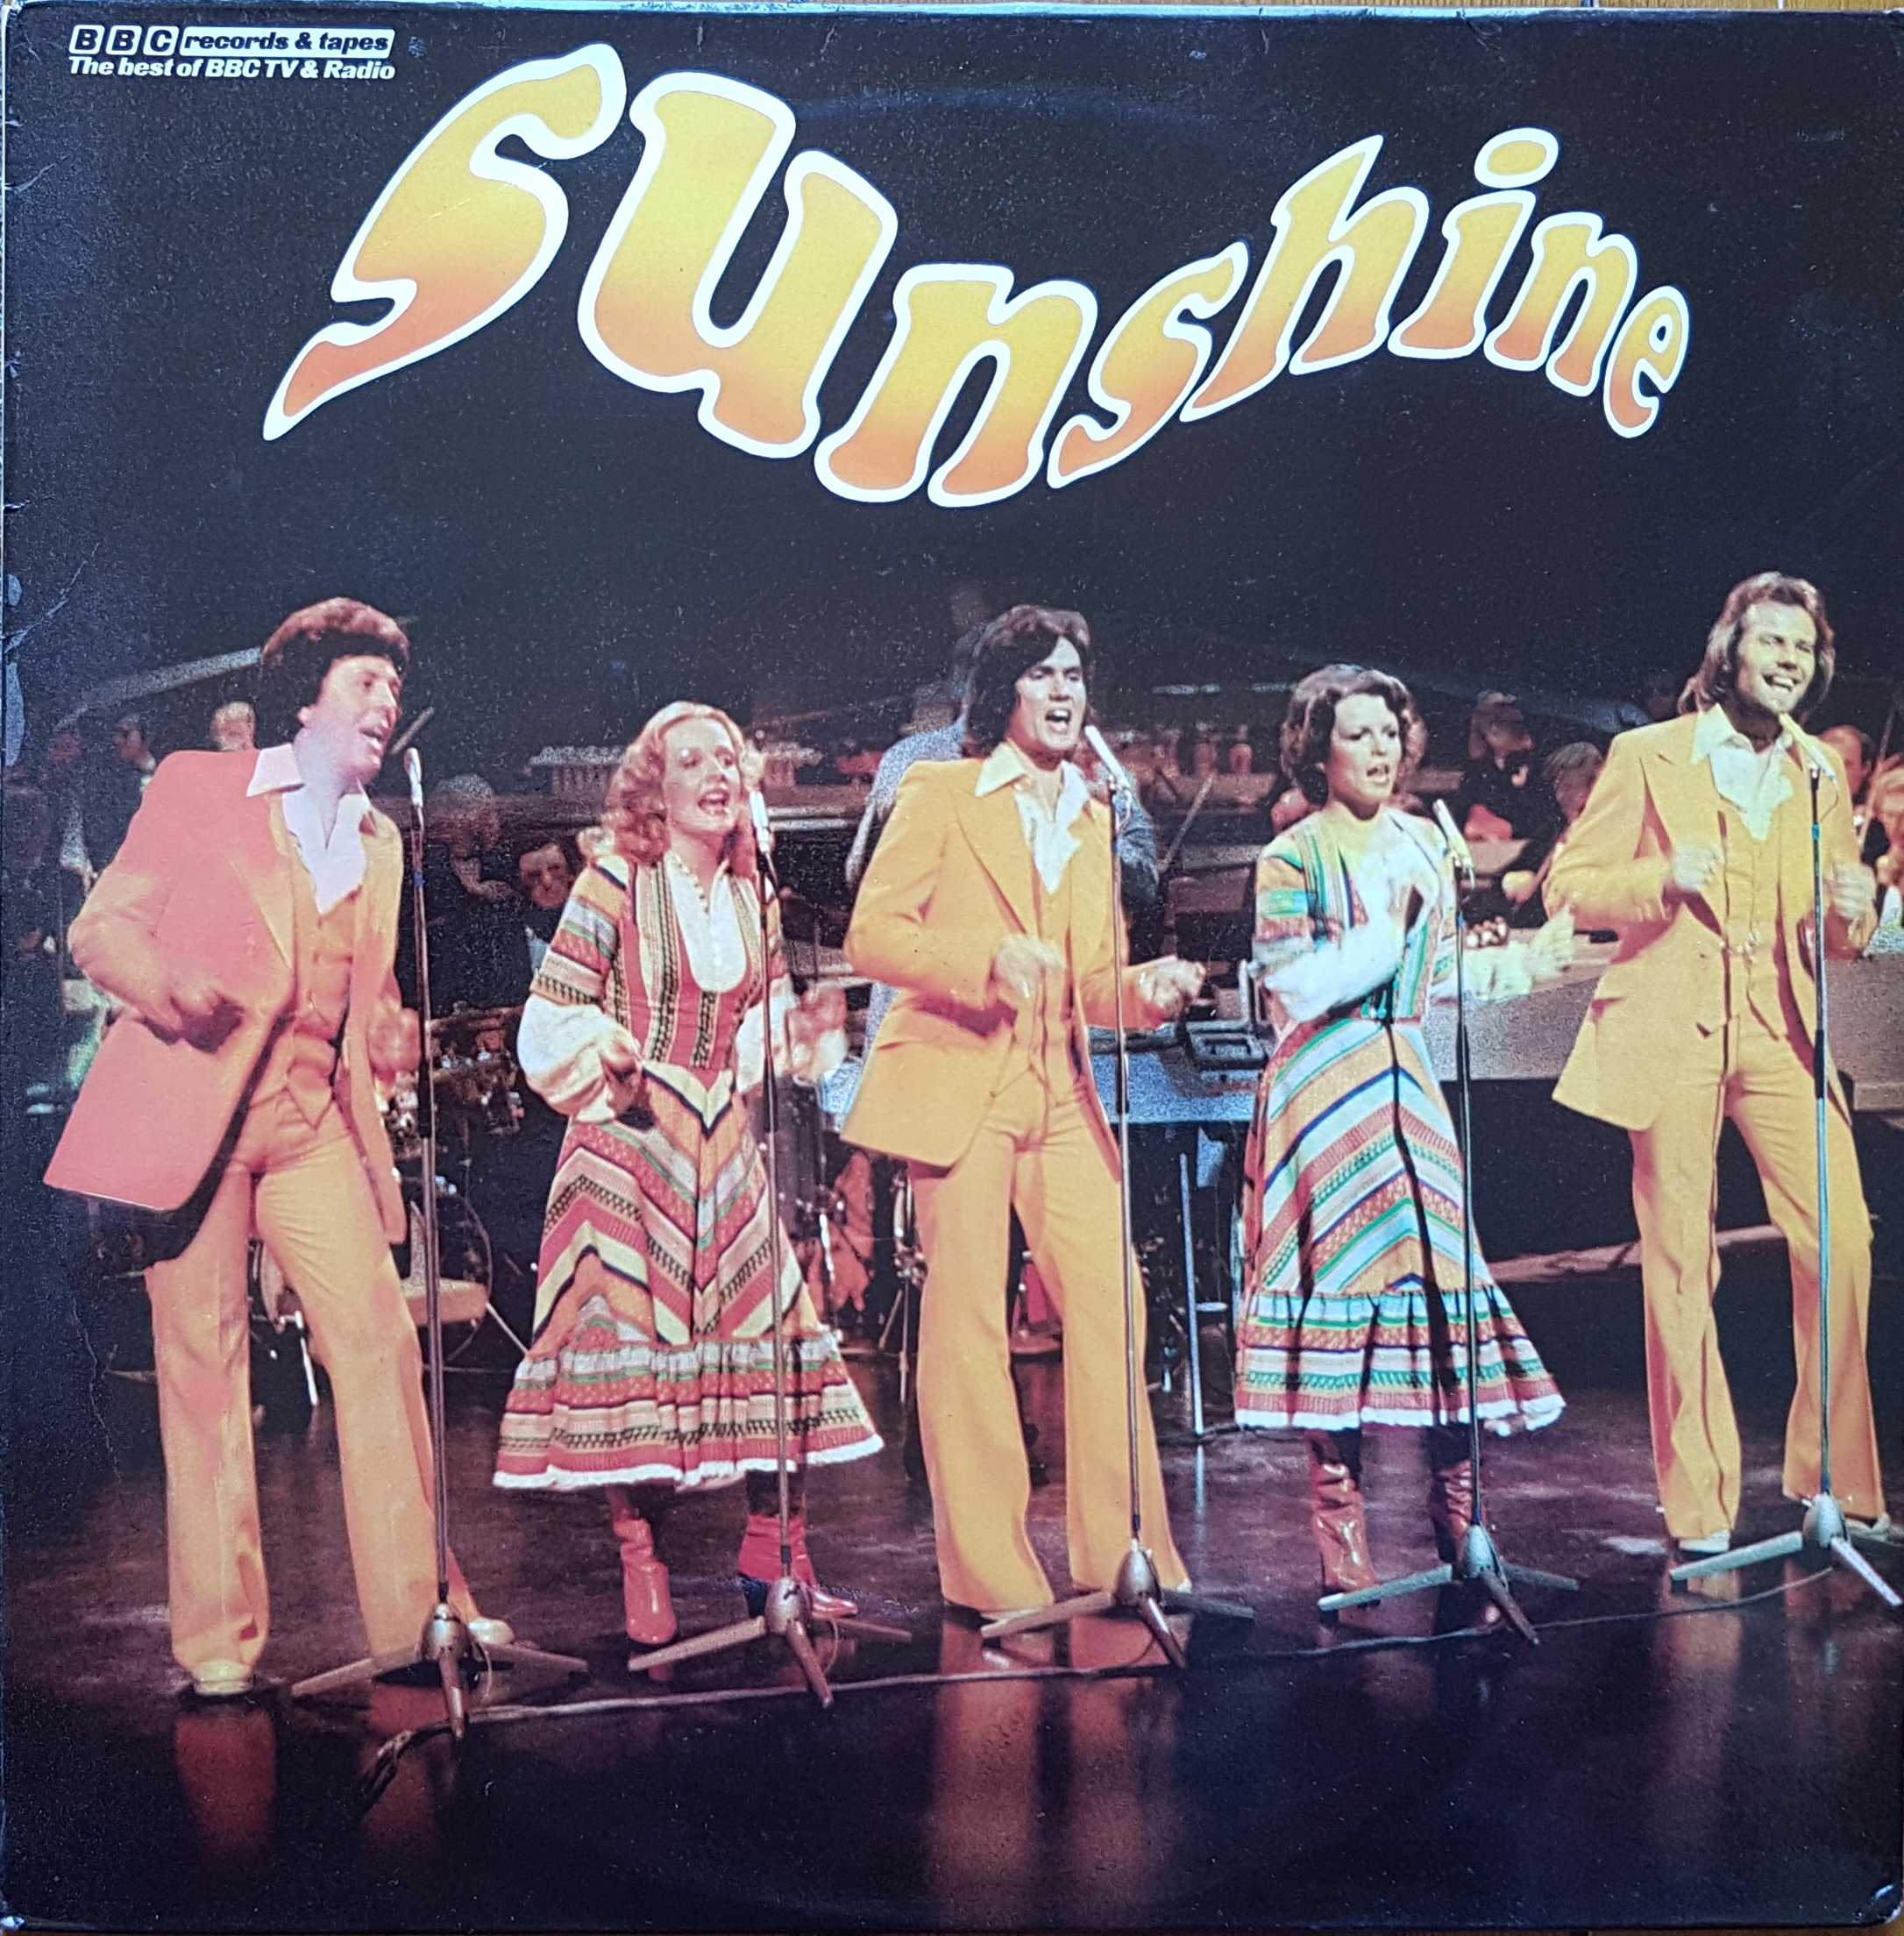 Picture of BEMP 003 Sunshine by artist Sunshine from the BBC albums - Records and Tapes library